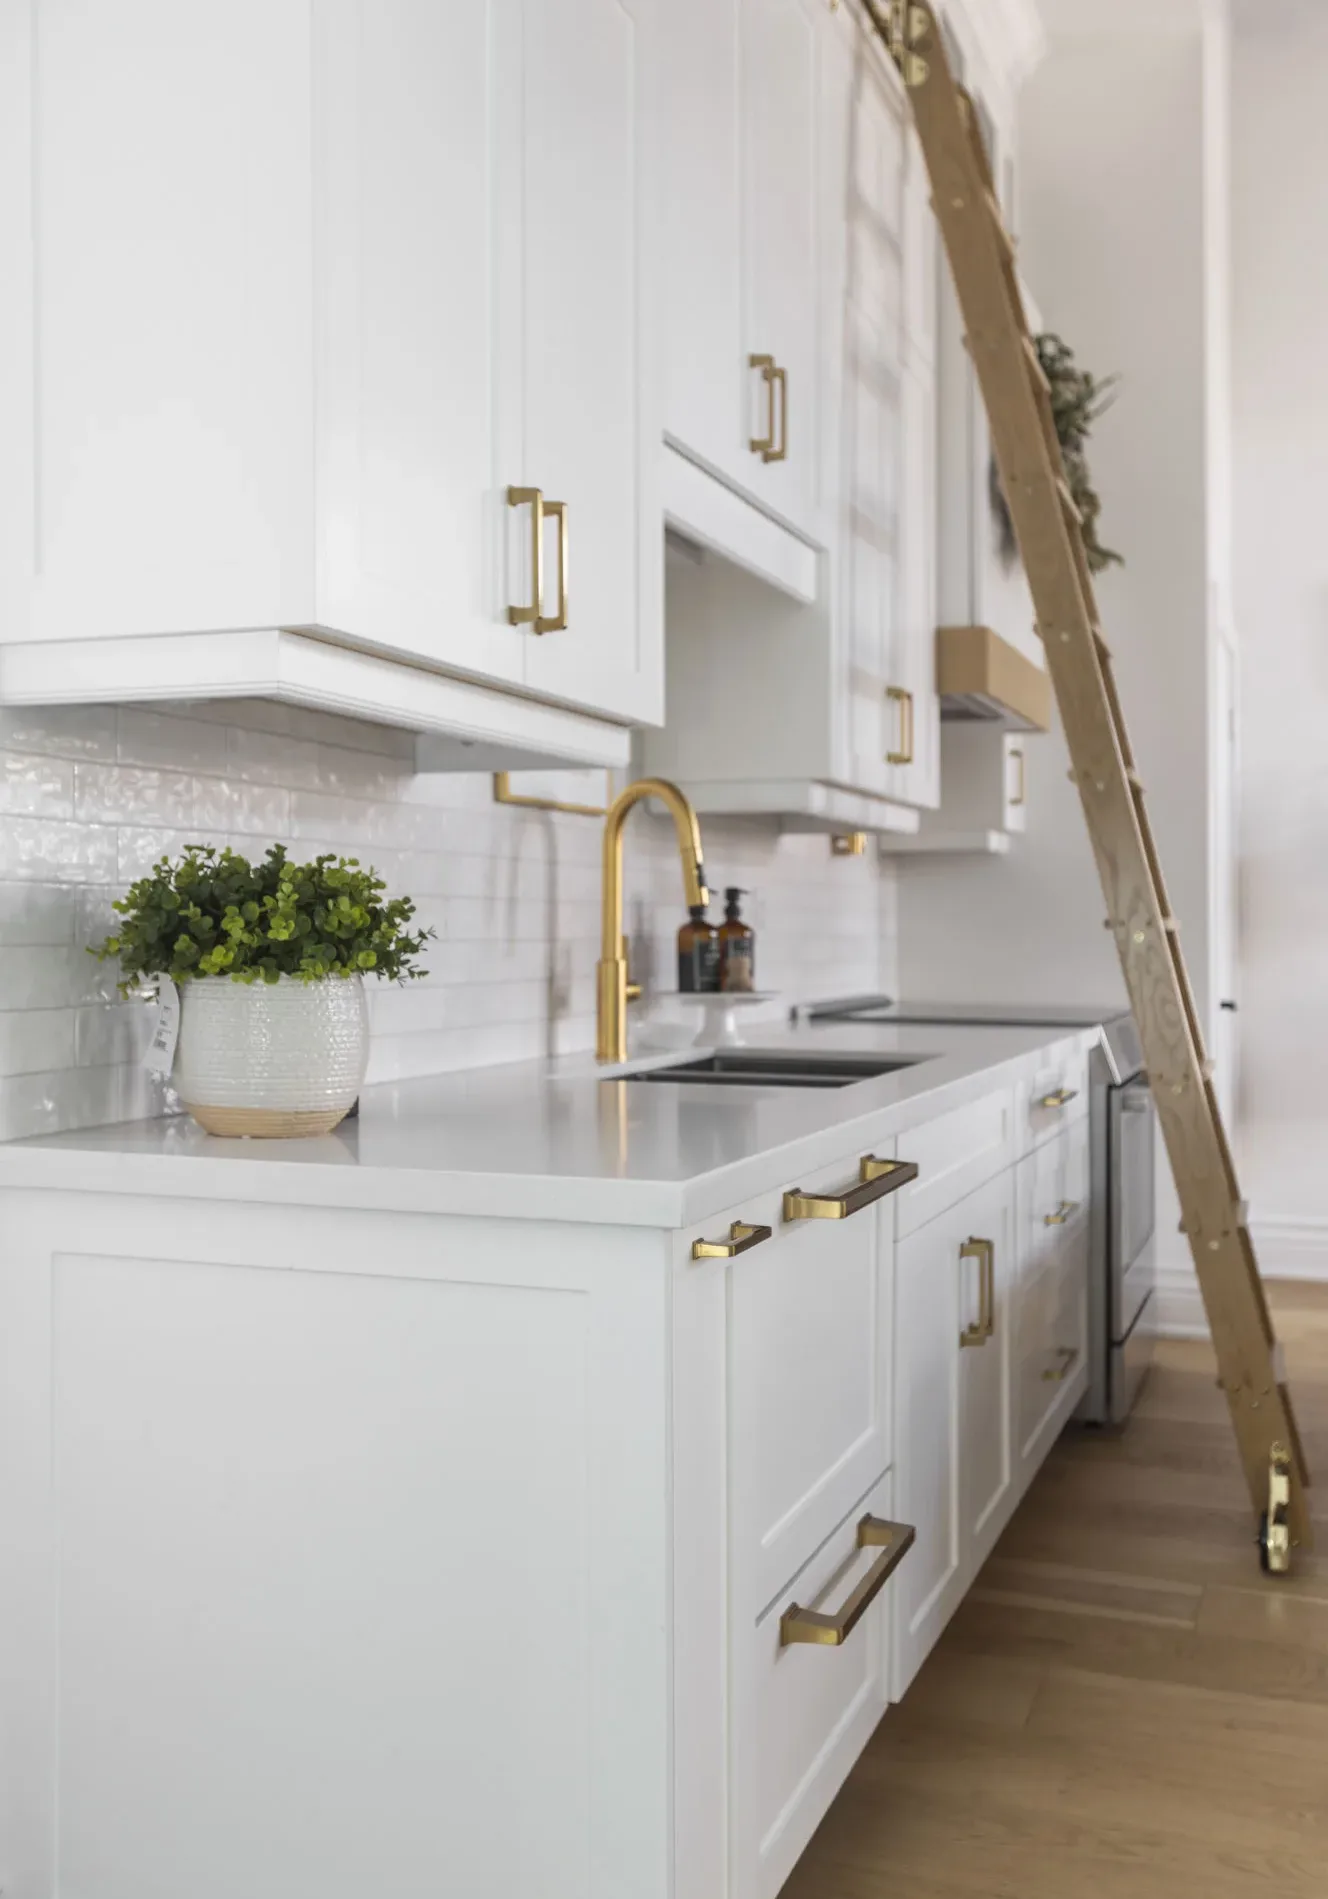 A side view of an all white modern kitchen with gold hardware with a gliding gold ladder